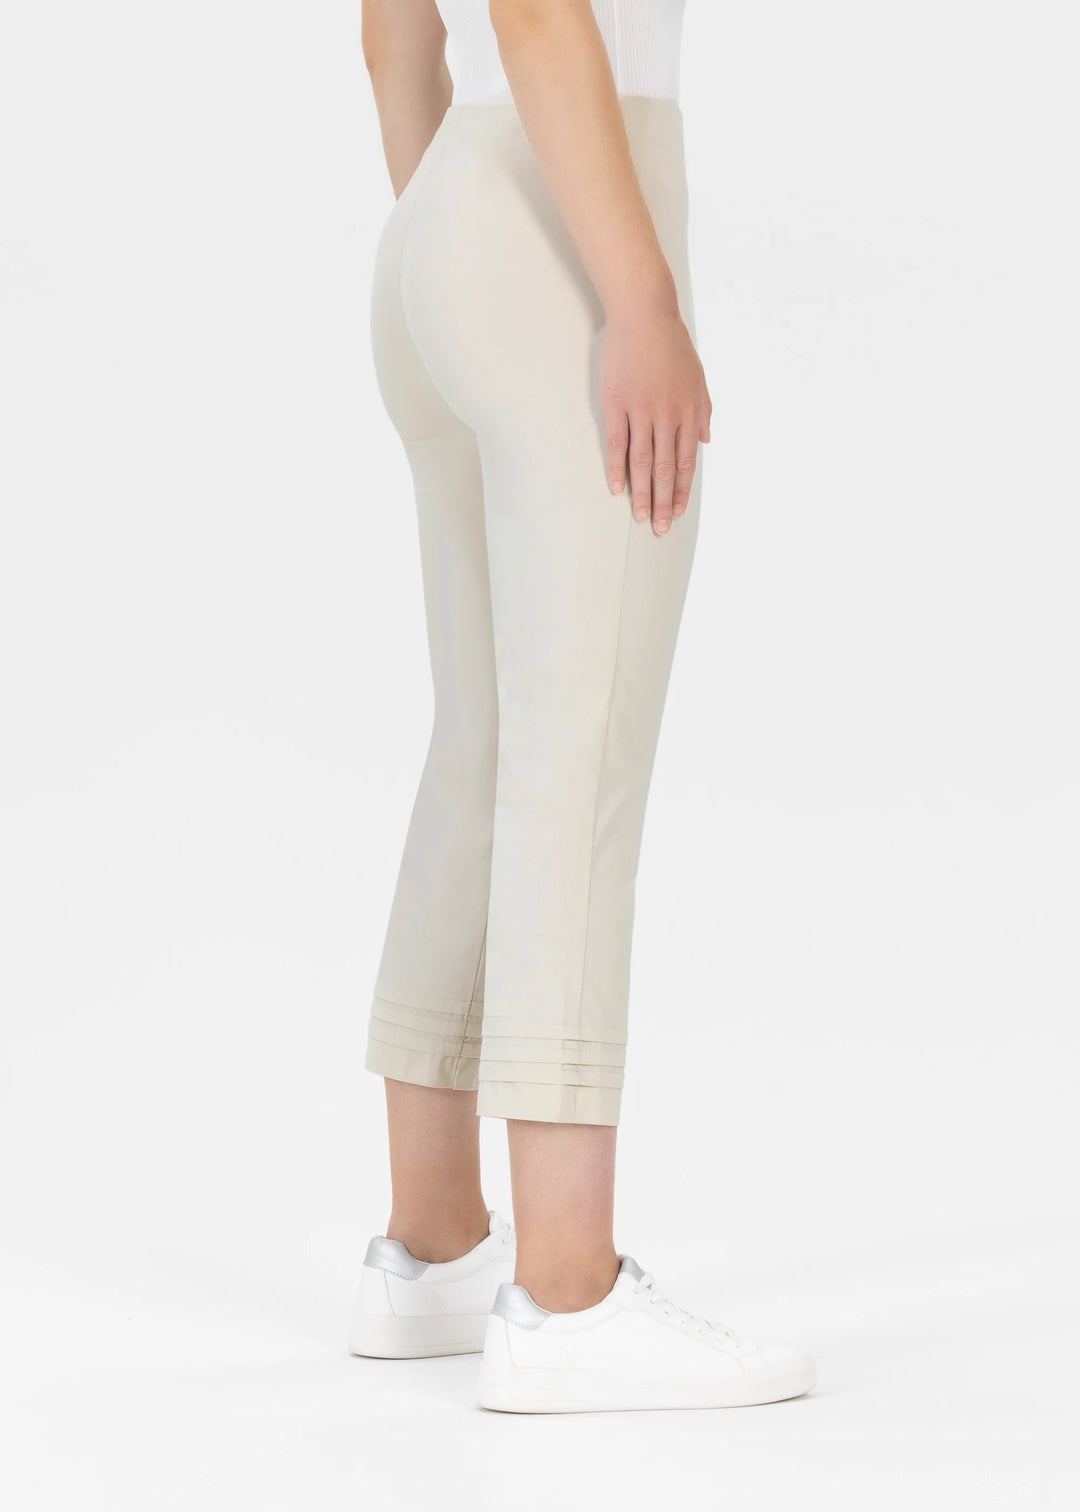 Stehmann Ina Summer Bengaline Trousers In Stone